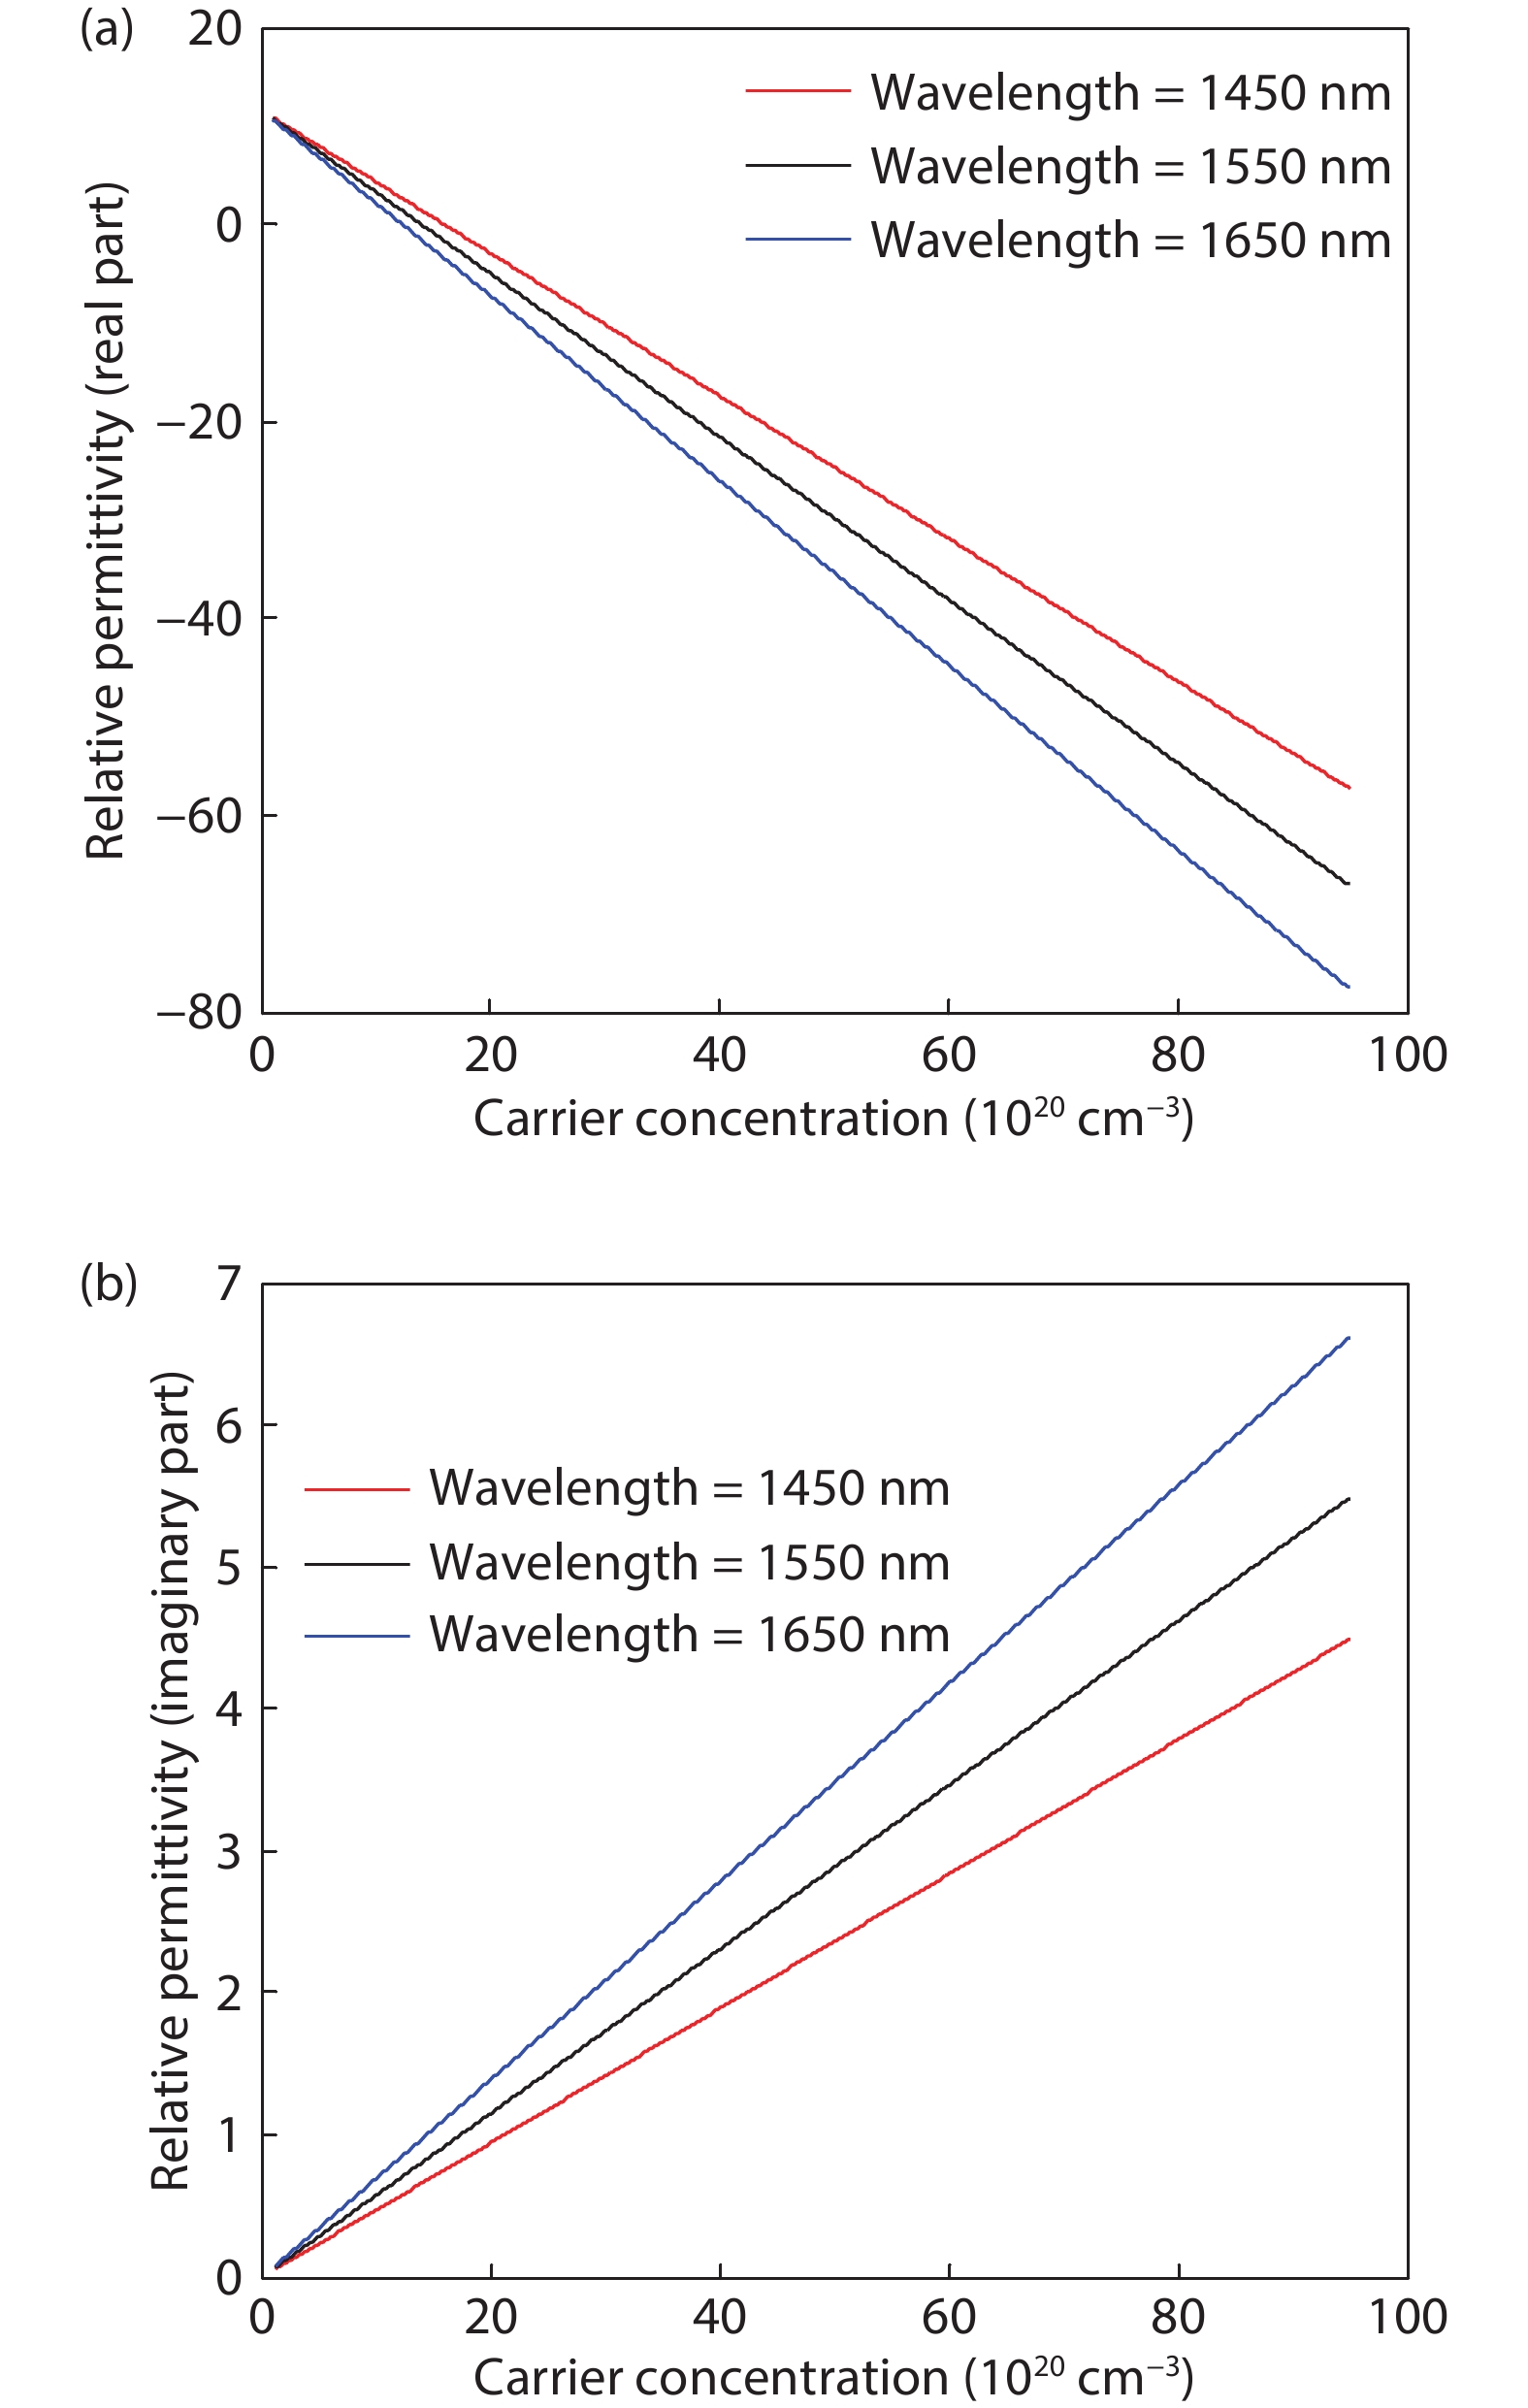 (Color online) Relative permittivity (a) real part and (b) imaginary part versus carrier concentration at different wavelength.